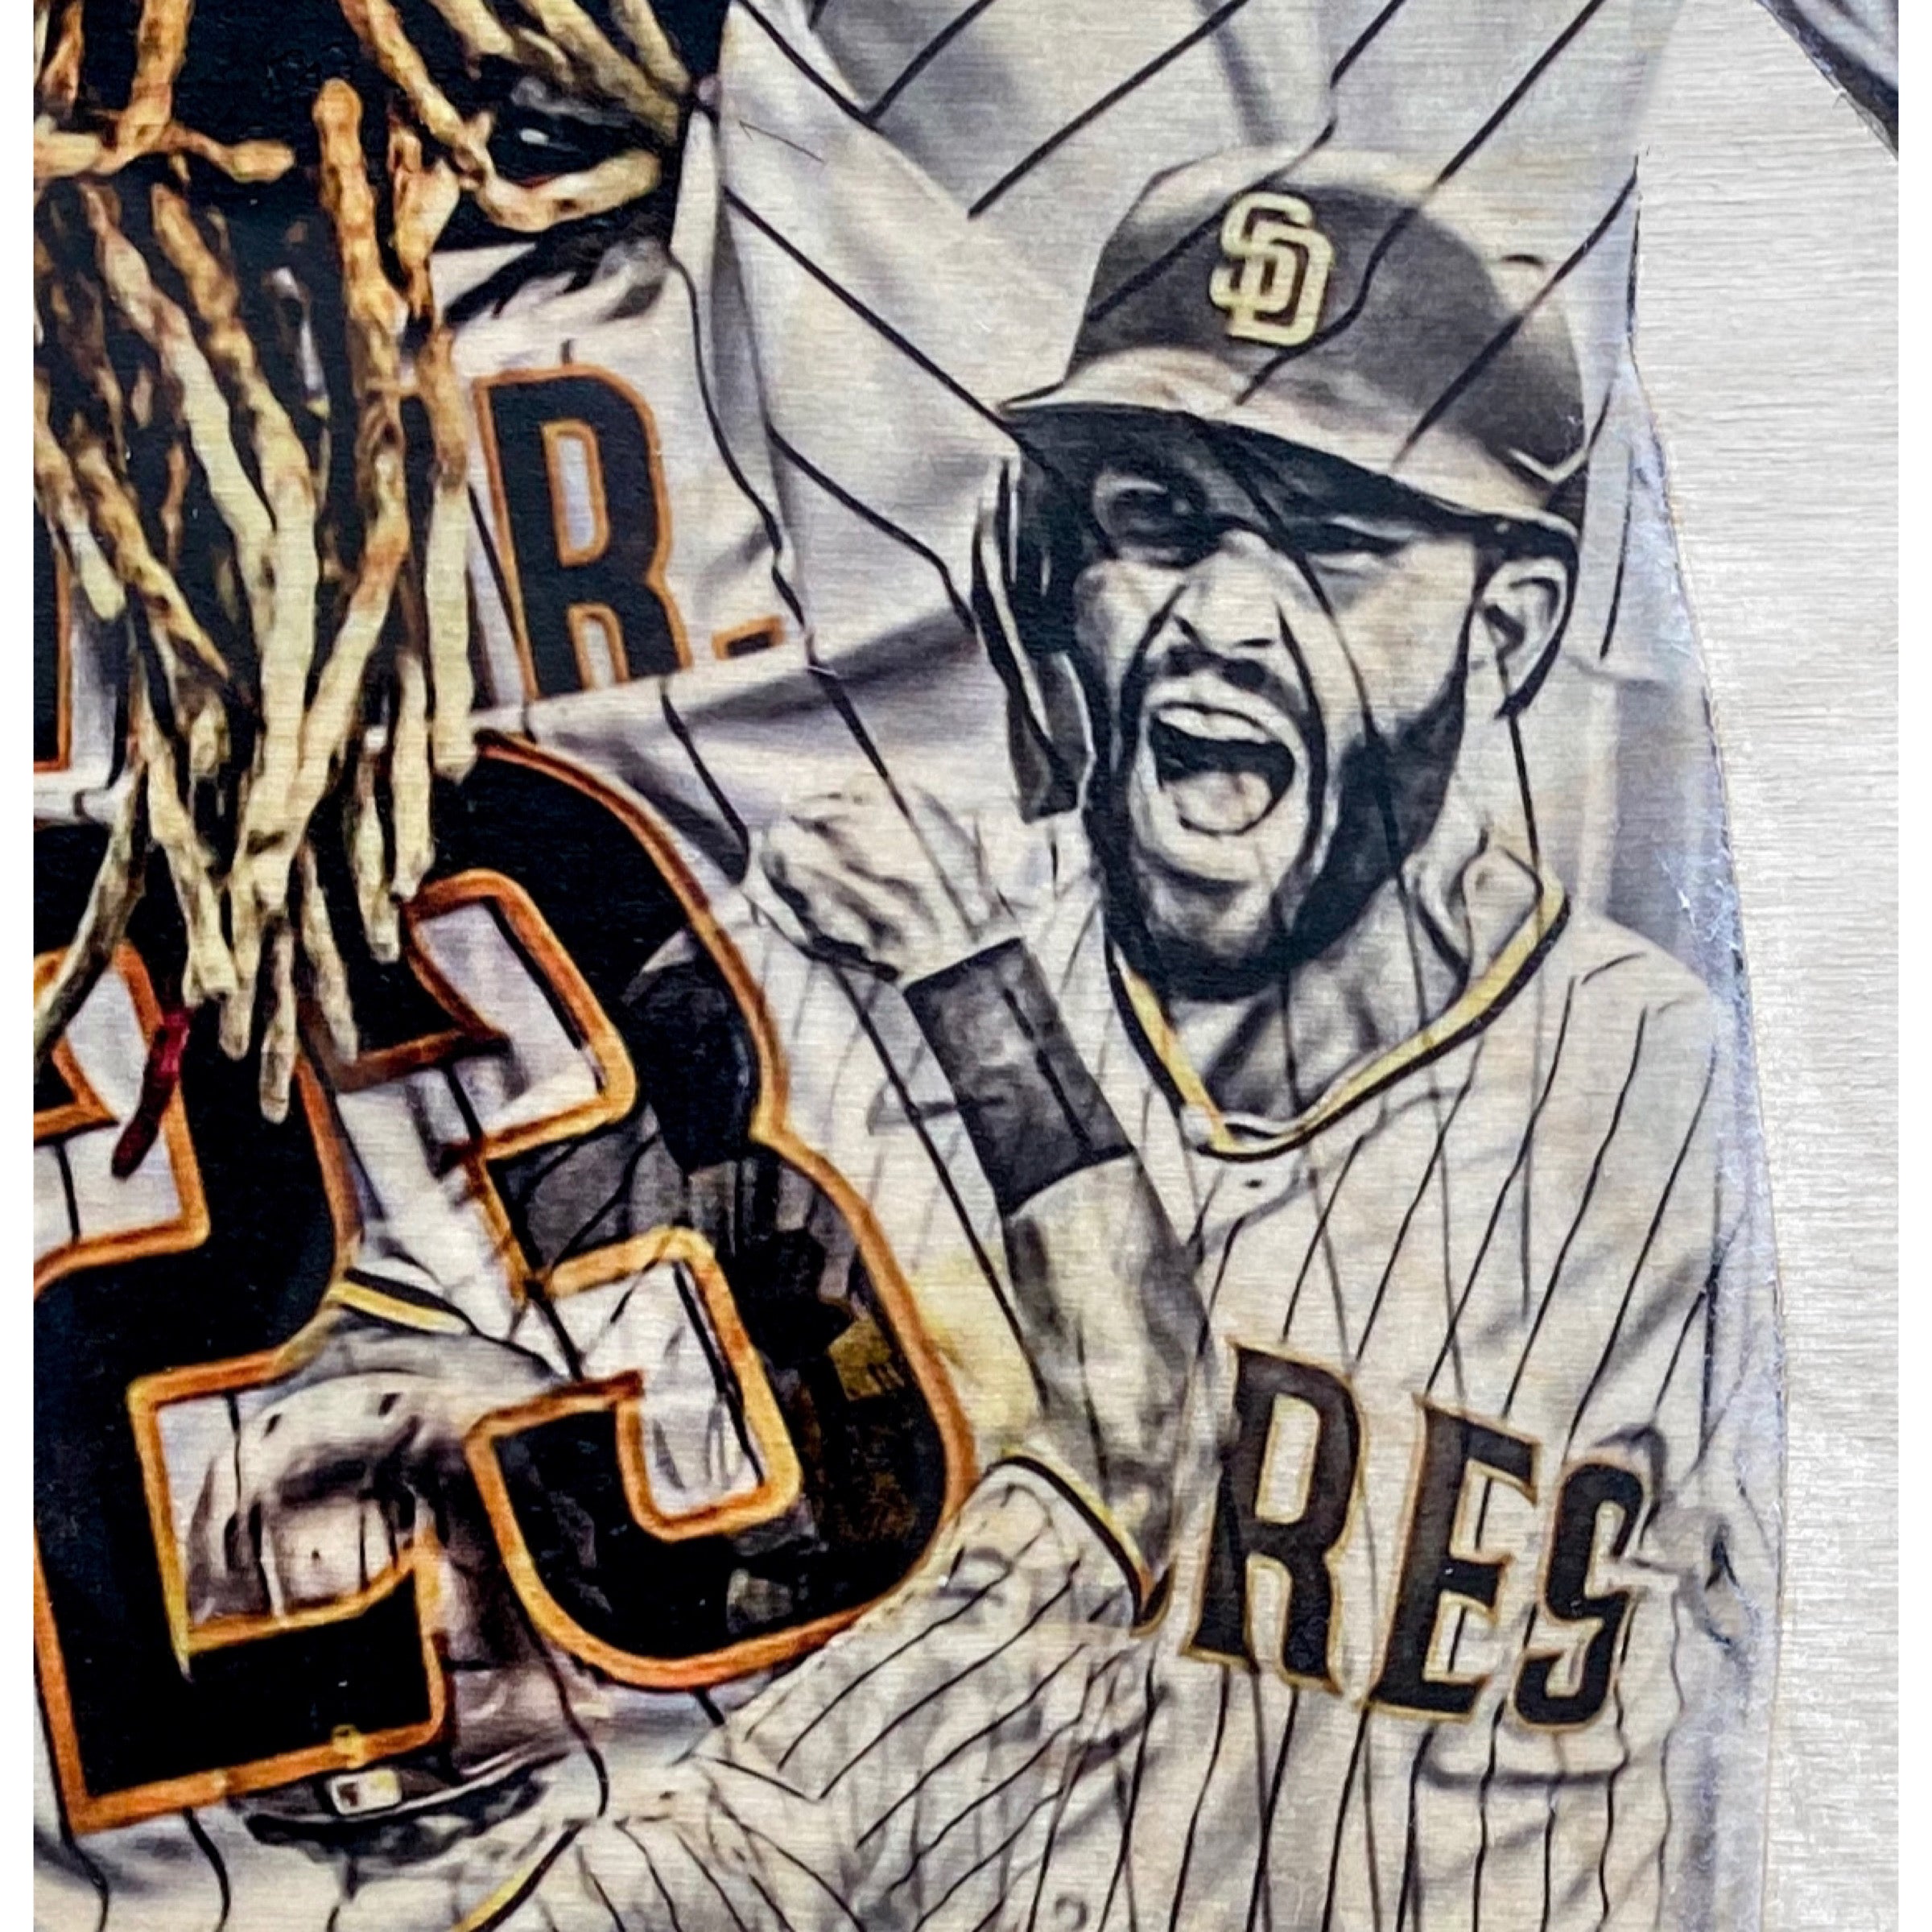 Following up my Slam Diego video from yesterday with some Slam Diego art!  Love this team and comminity. : r/Padres